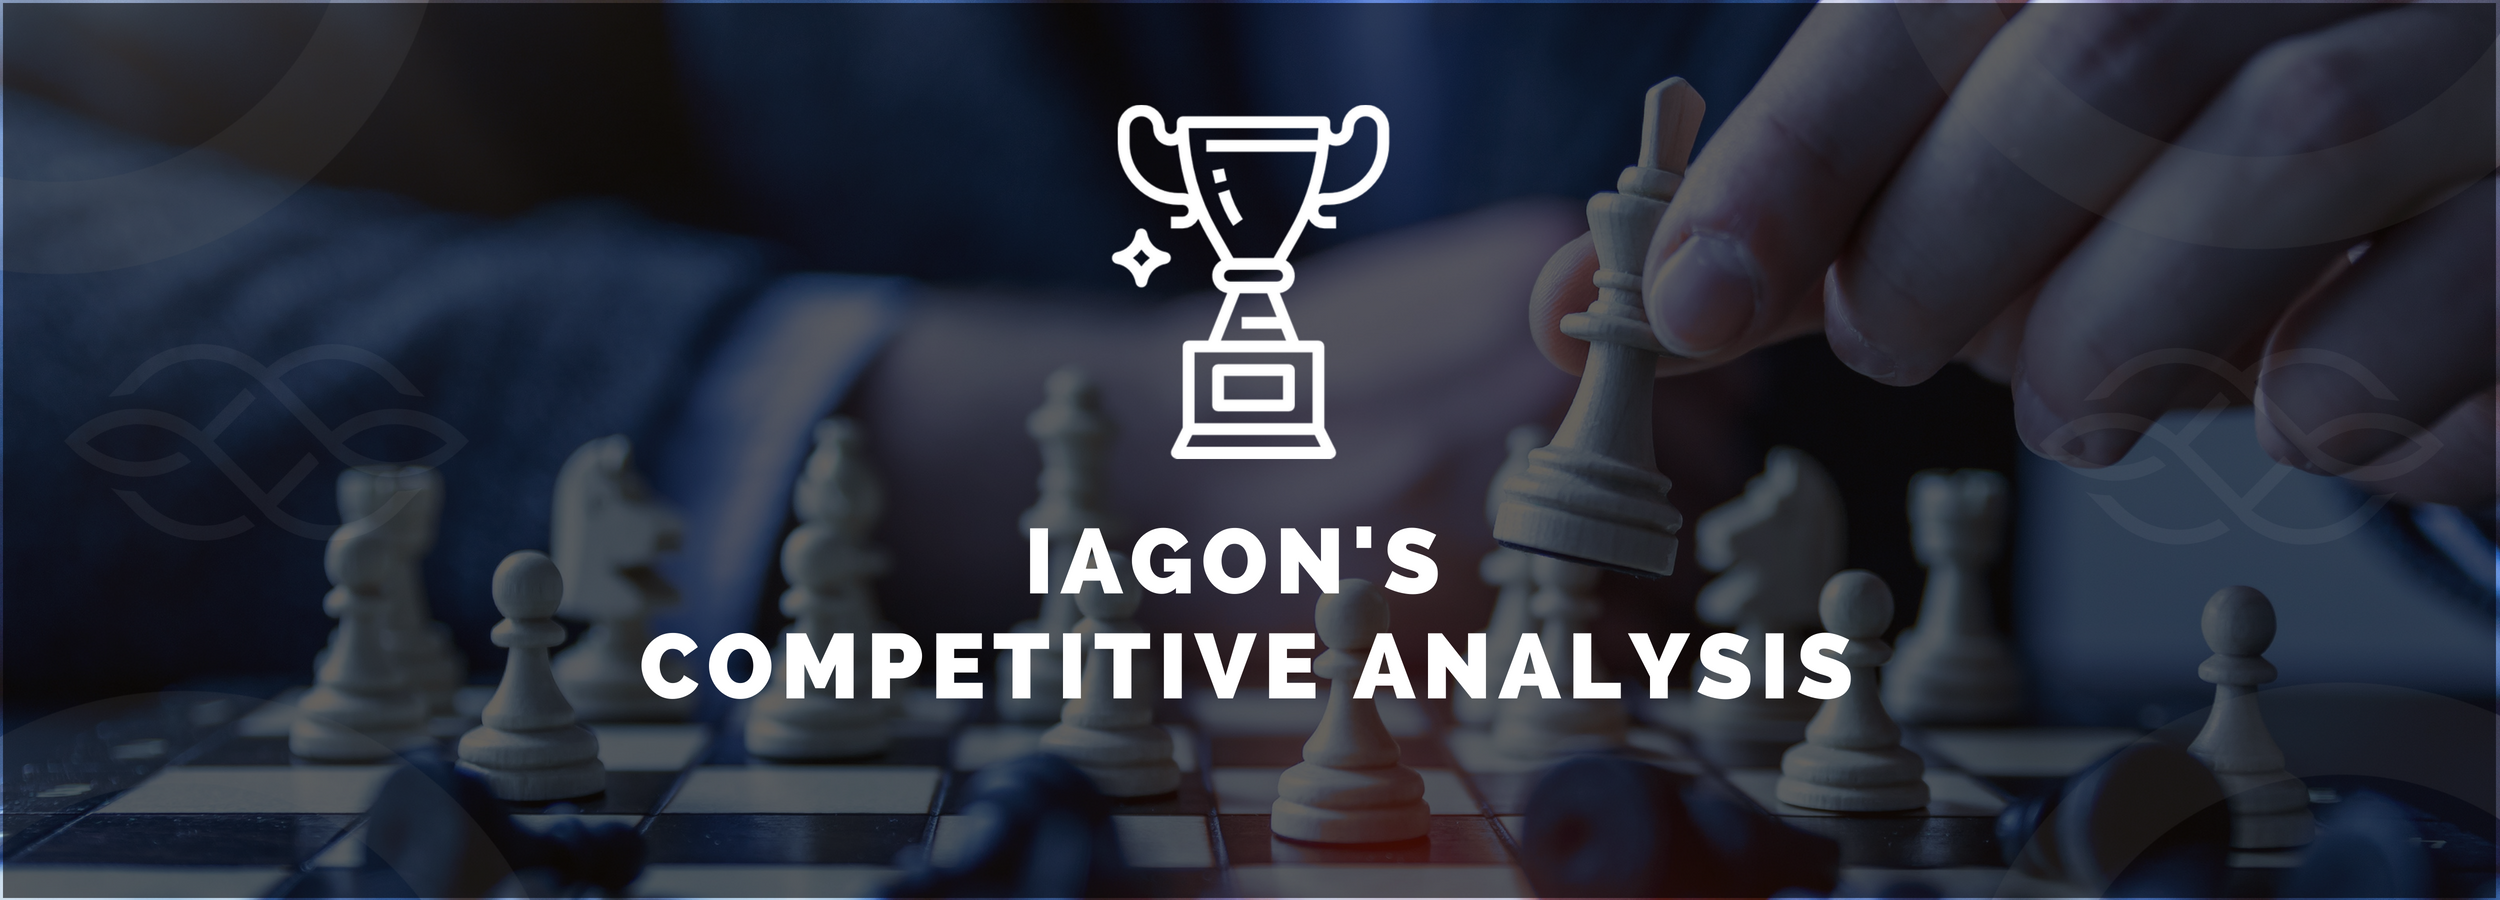 Did You Know: Iagon’s Competitive Analysis